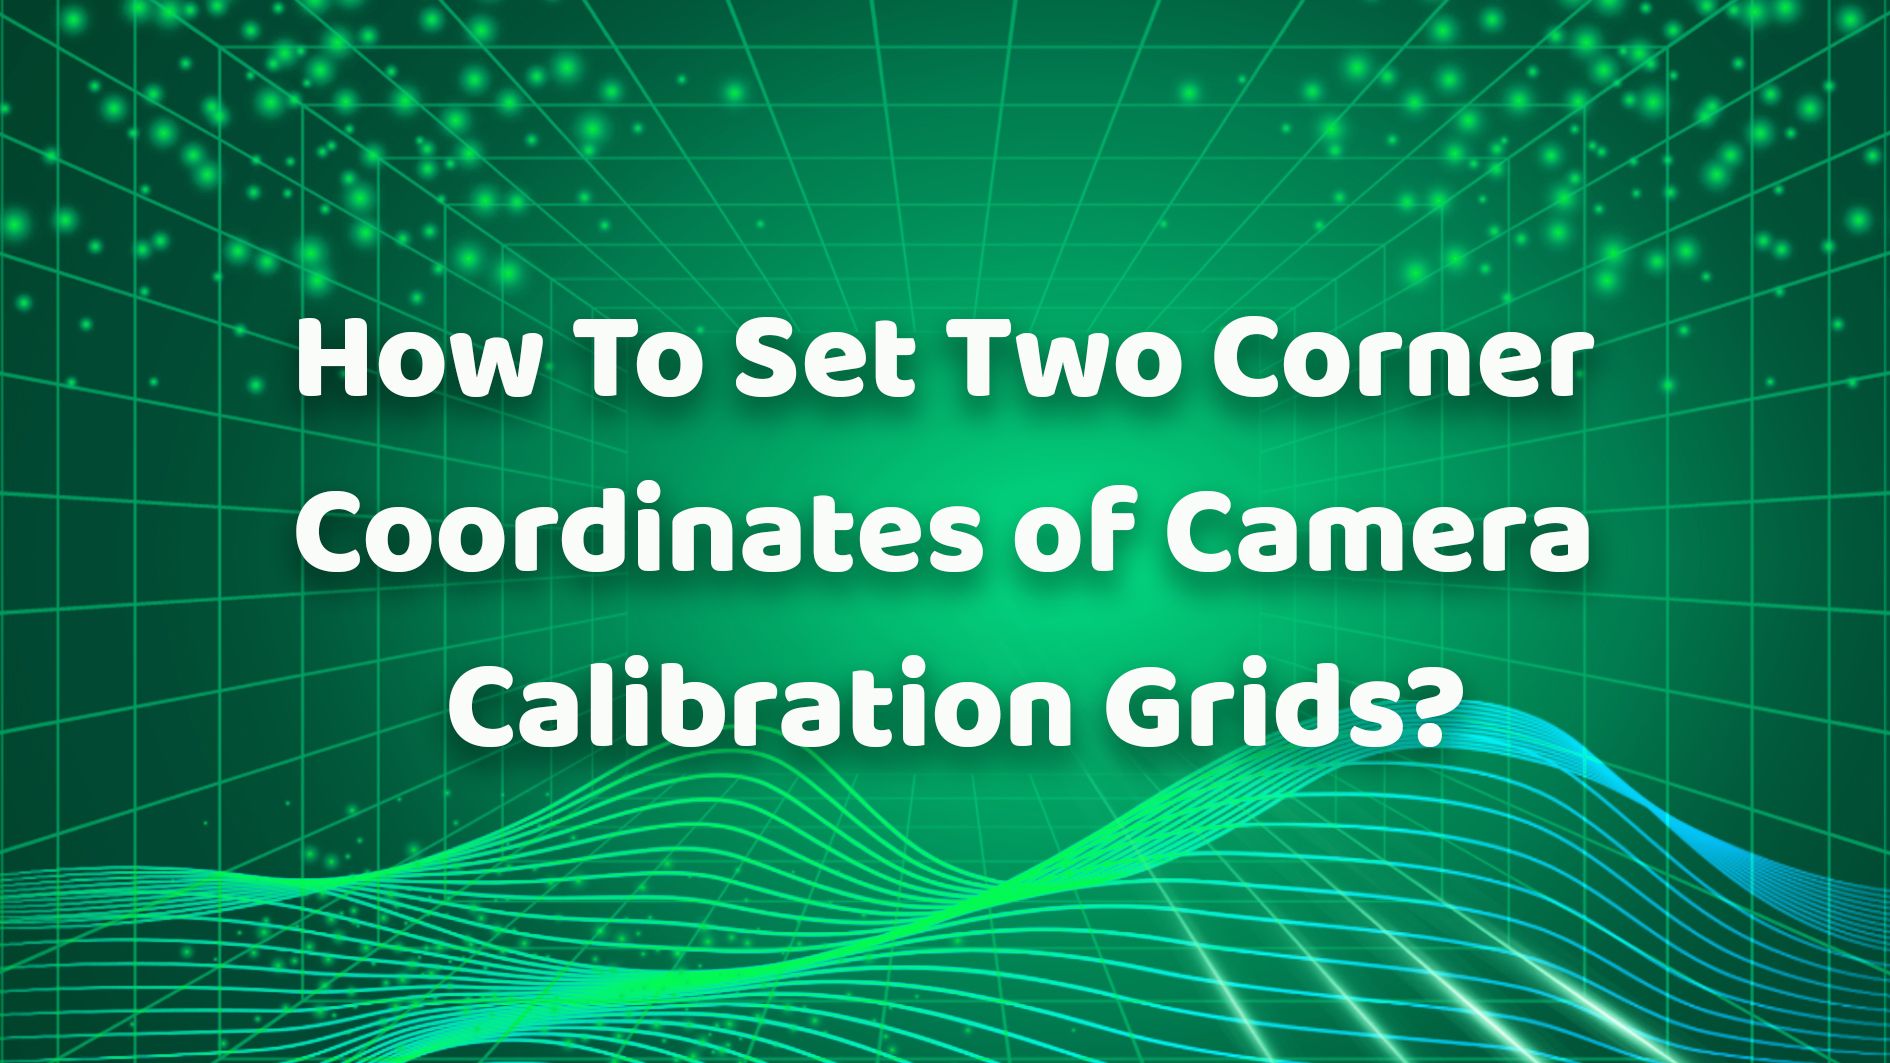 How To Set Two Corner Coordinates of Camera Calibration Grids？